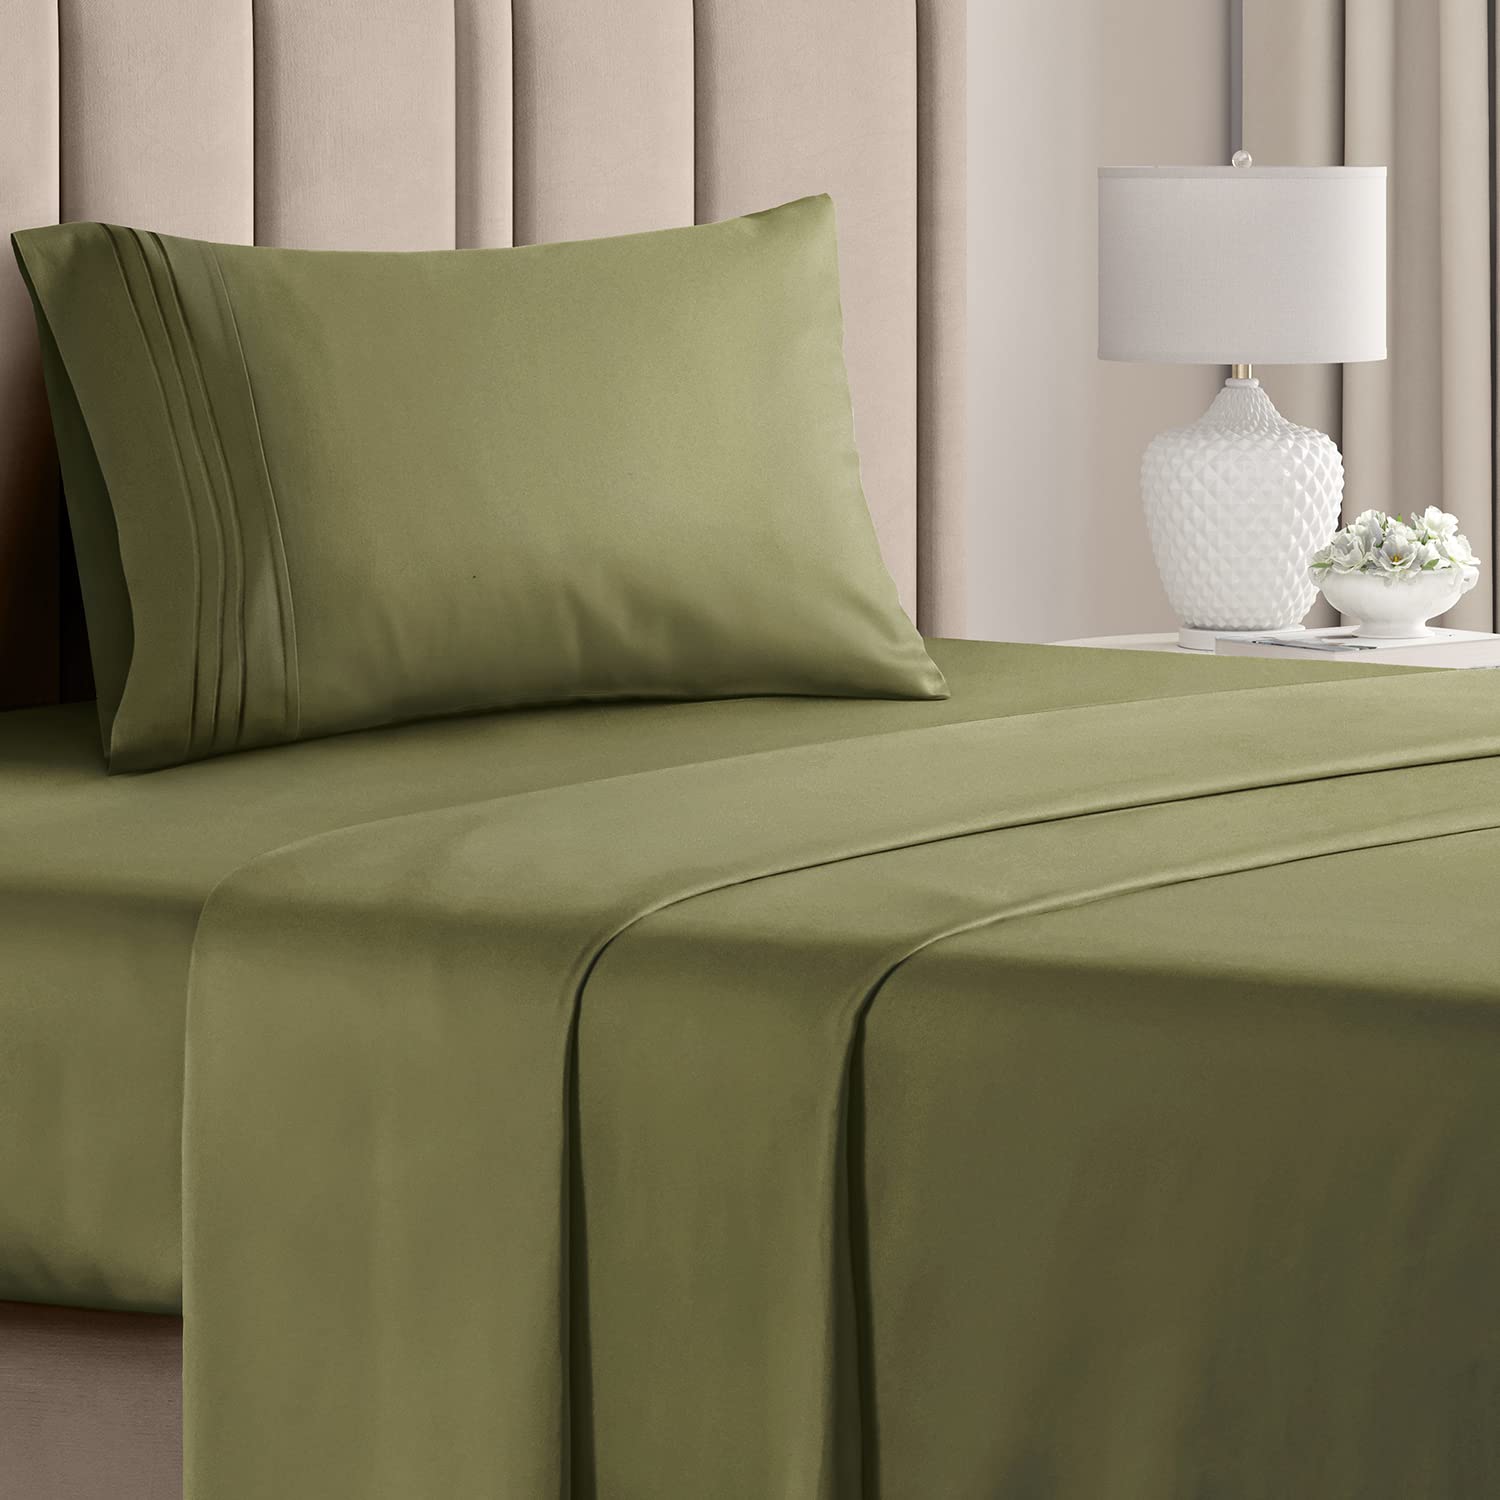 Book Cover Twin Size Sheet Set - 3 Piece Set - Hotel Luxury Bed Sheets - Extra Soft - Deep Pockets - Easy Fit - Breathable & Cooling - Wrinkle Free - Comfy – Sage Green Bed Sheets – Twins Sheets - 3 PC